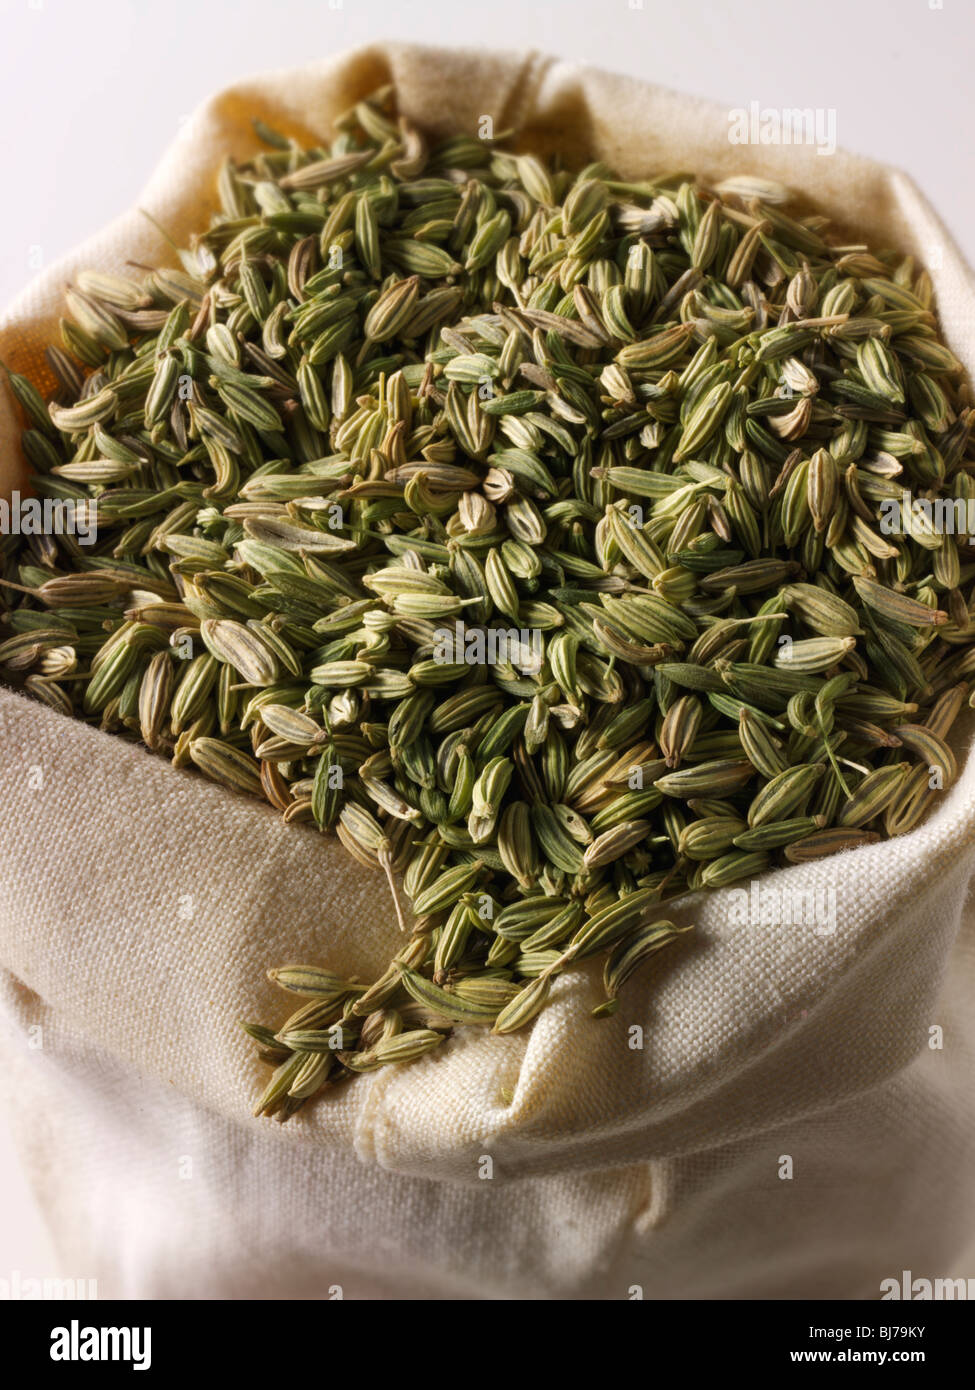 Whole fennel seeds  in a spice sack bag Stock Photo